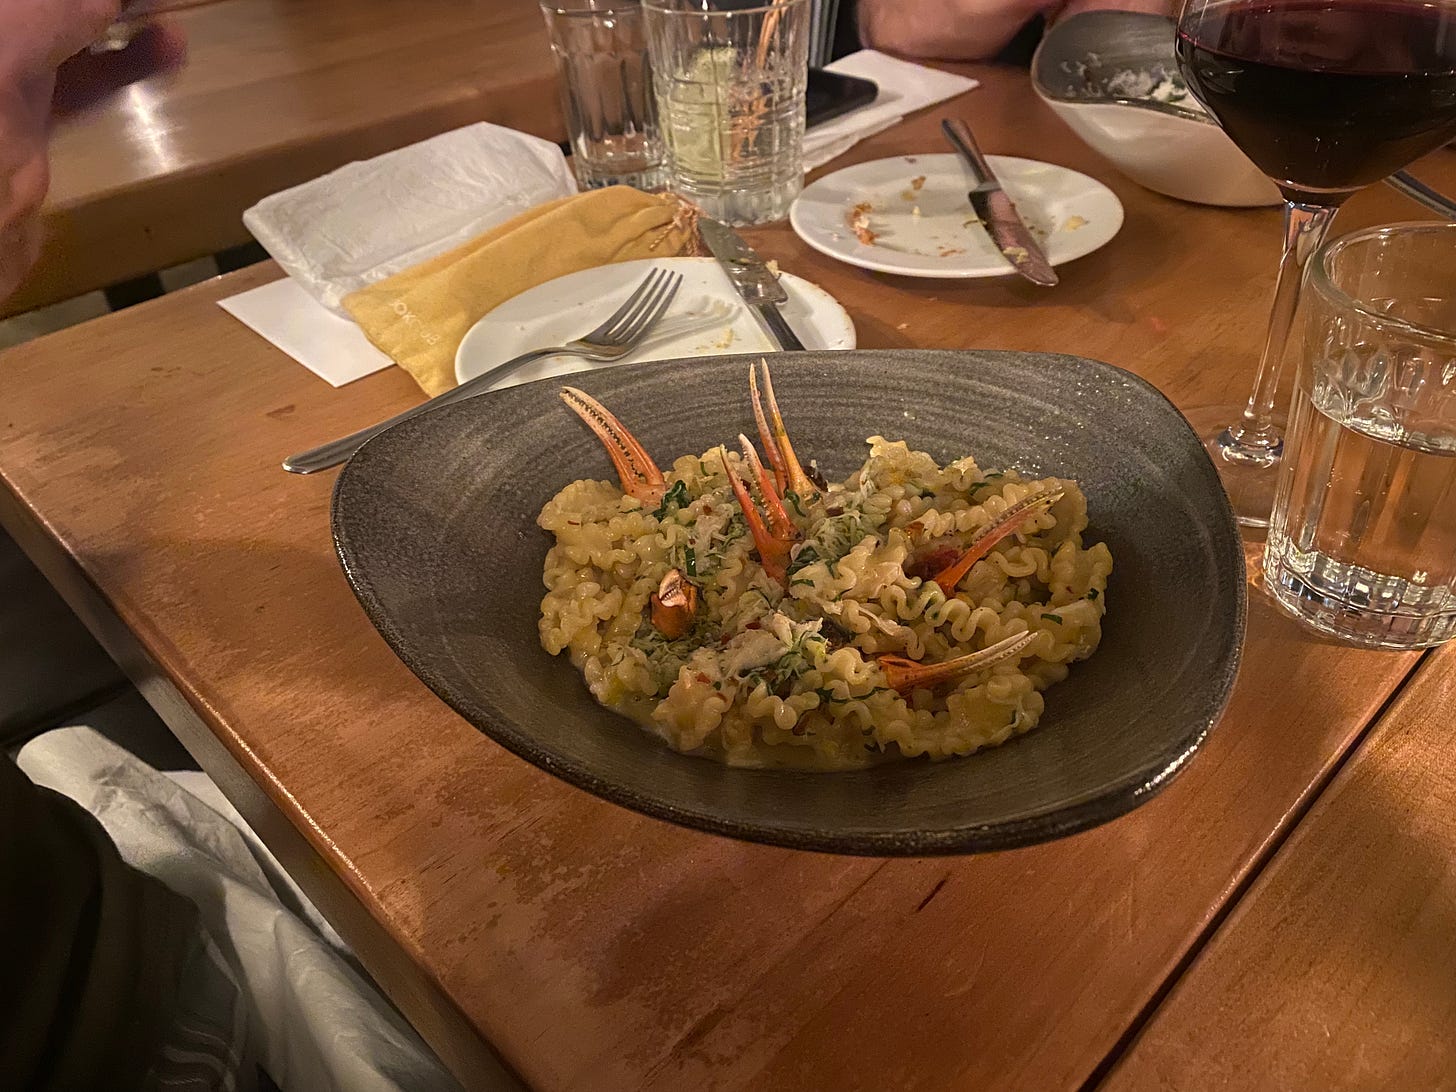 An asymmetrical bowl of mafalde noodles in a creamy sauce with greens. Small crab claws stick out from the pasta, five or six of them. Also on the table are glasses of water and side plates with forks and knives resting on them.